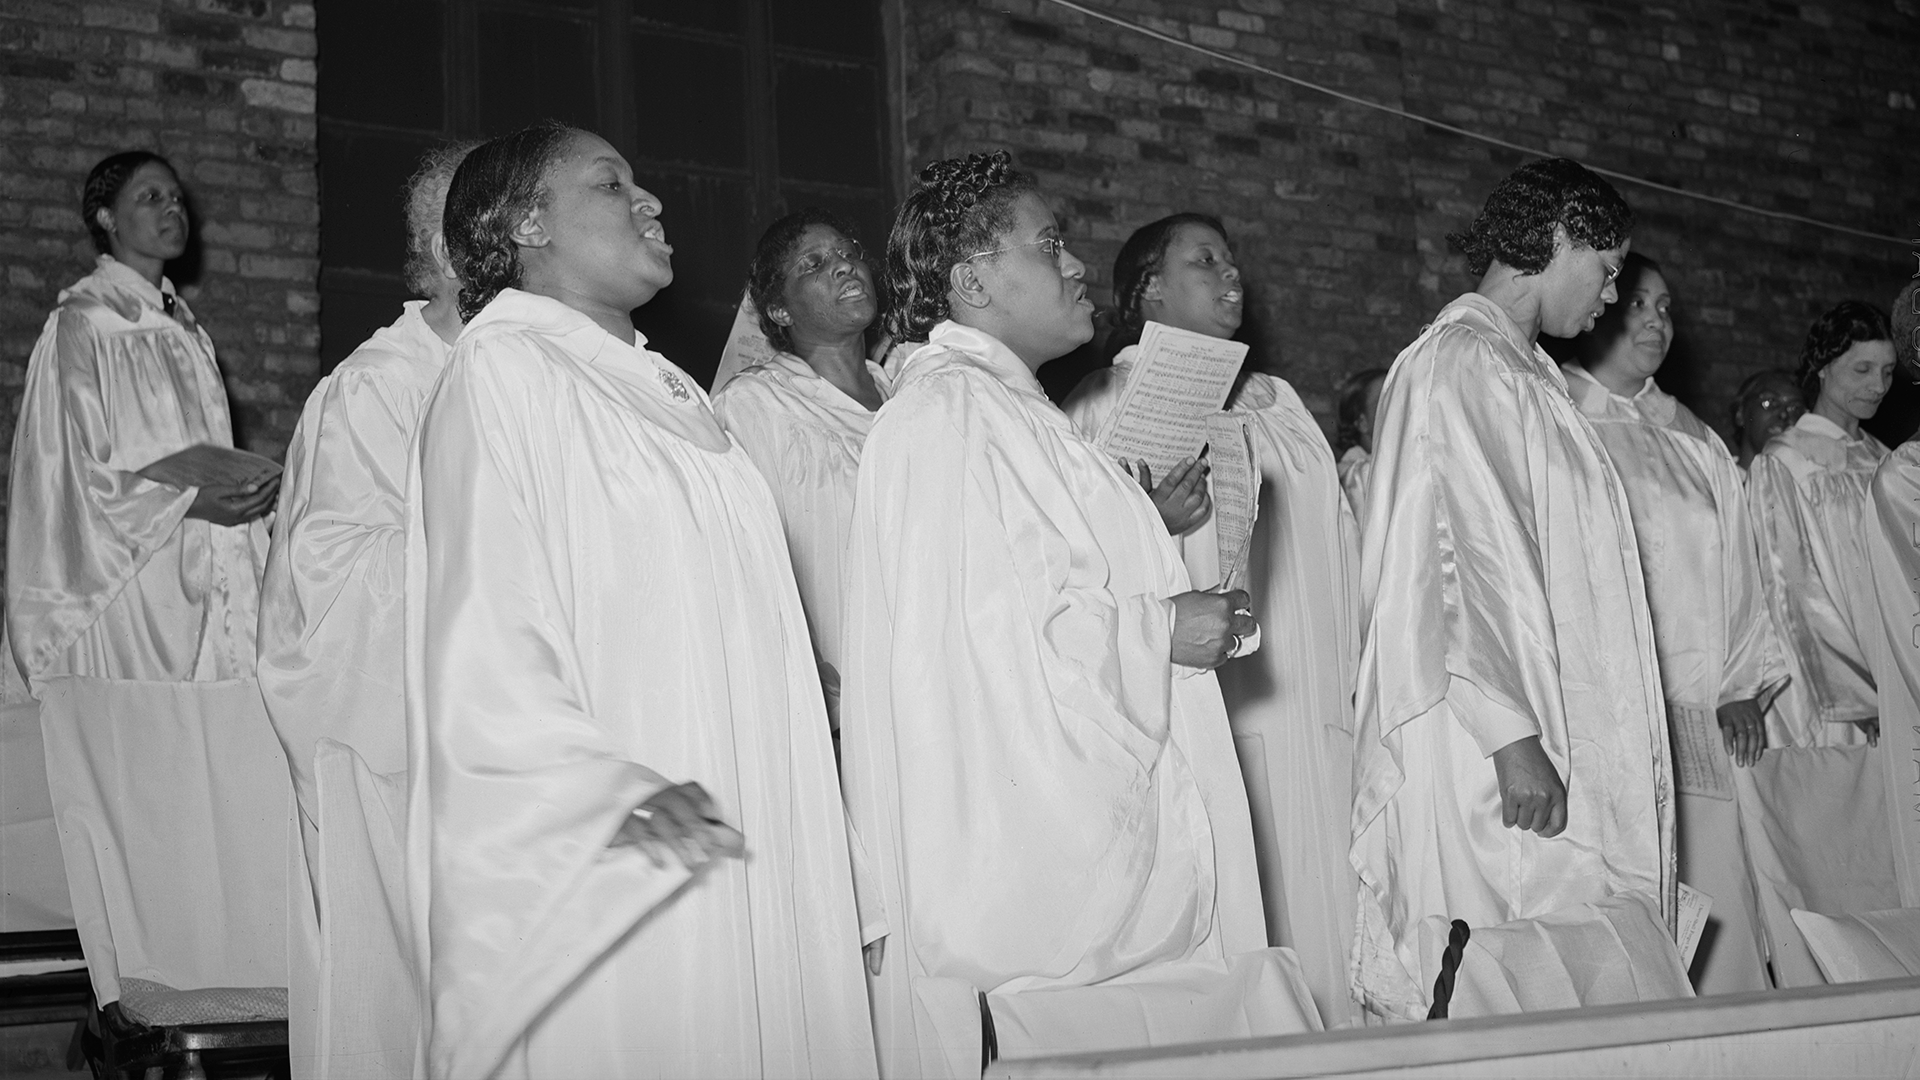 Thomas Dorsey co-founds the National Convention of Gospel Choirs and Choruses in 1933 -- soon the gospel choir would be one of the most important elements of the gospel tradition.